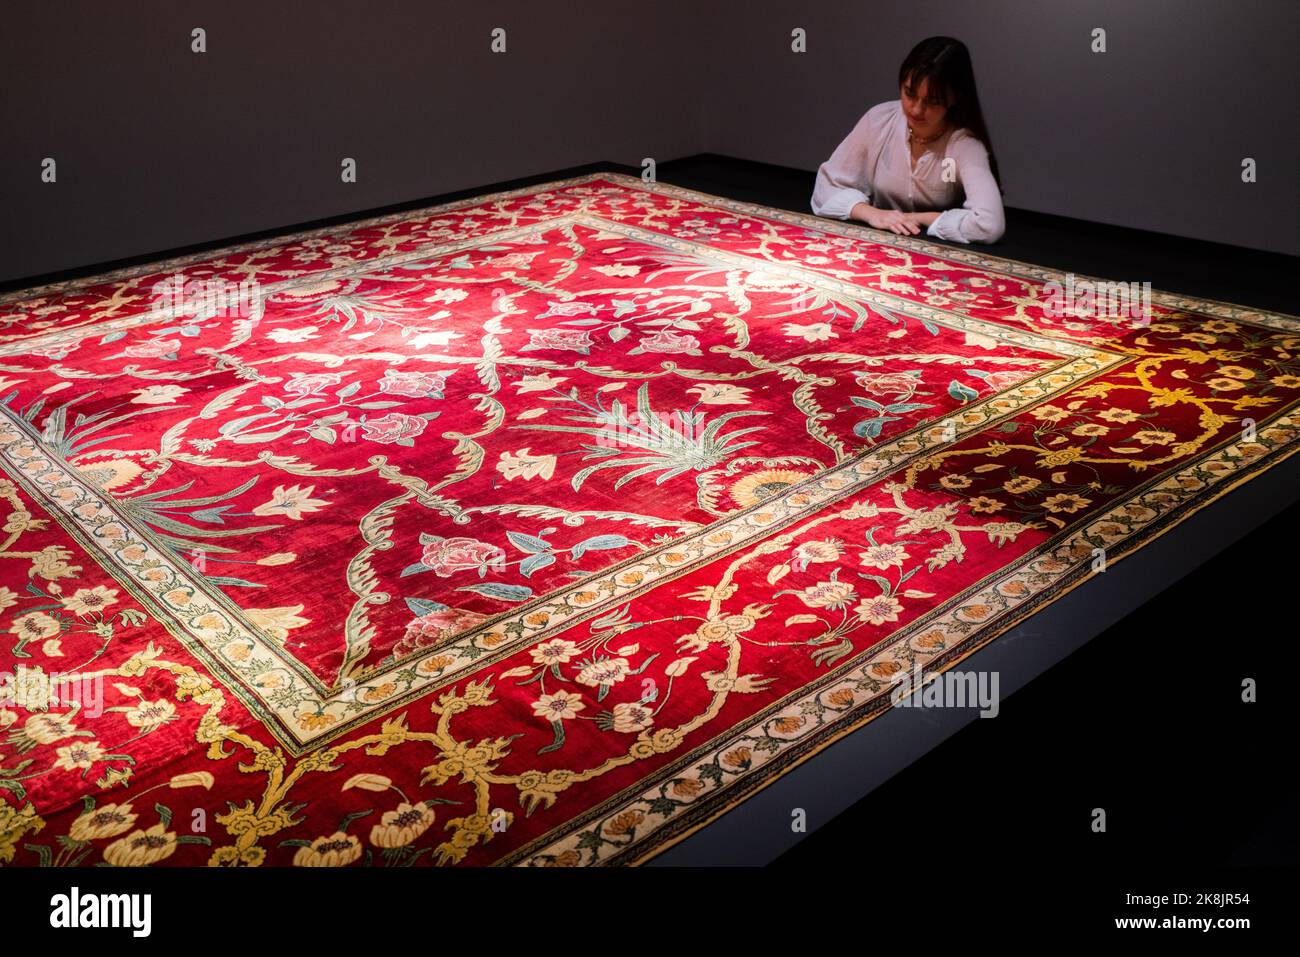 London UK. 24 October 2022 . A RARE ROYAL MUGHAL PASHIMA CARPET Northern India, circa 1650, Estimate GBP 2,500,000-3,500,000. Highlights from the auction at Christie's  Art of the Islamic and Indian World's including Oriental rugs and carpets. The sale takes place on 27 October at Christie;s King Street .Credit: amer ghazzal/Alamy Live News Stock Photo